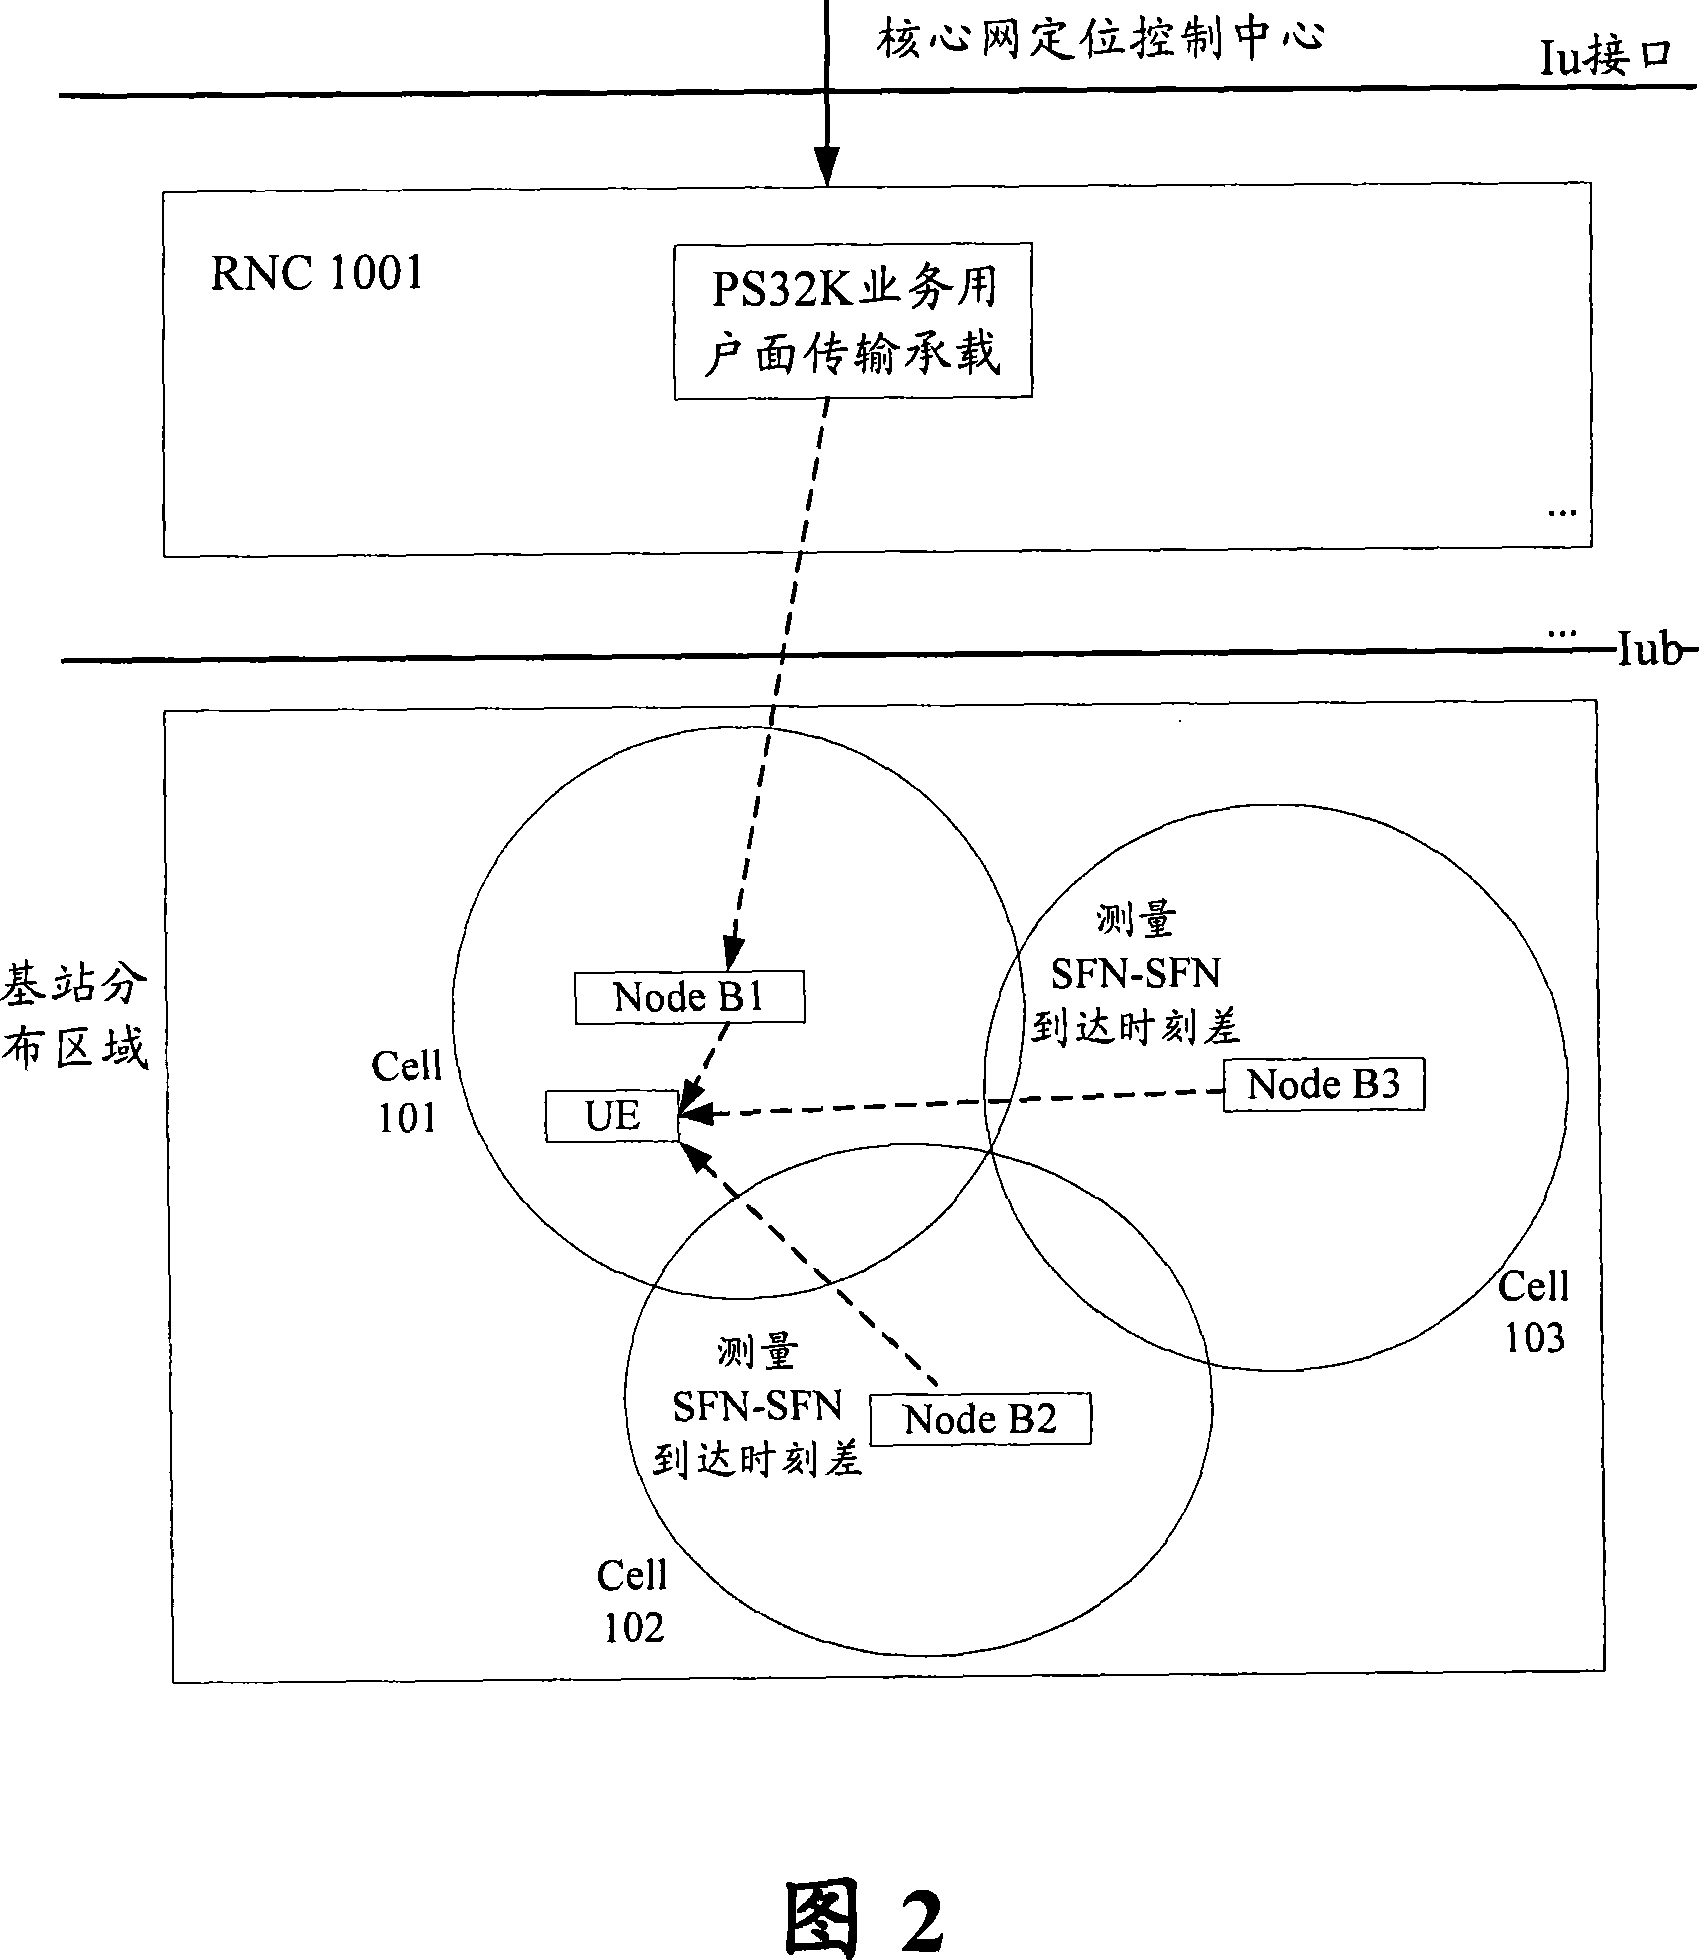 Positioning method for the user plane to observe the reached time difference